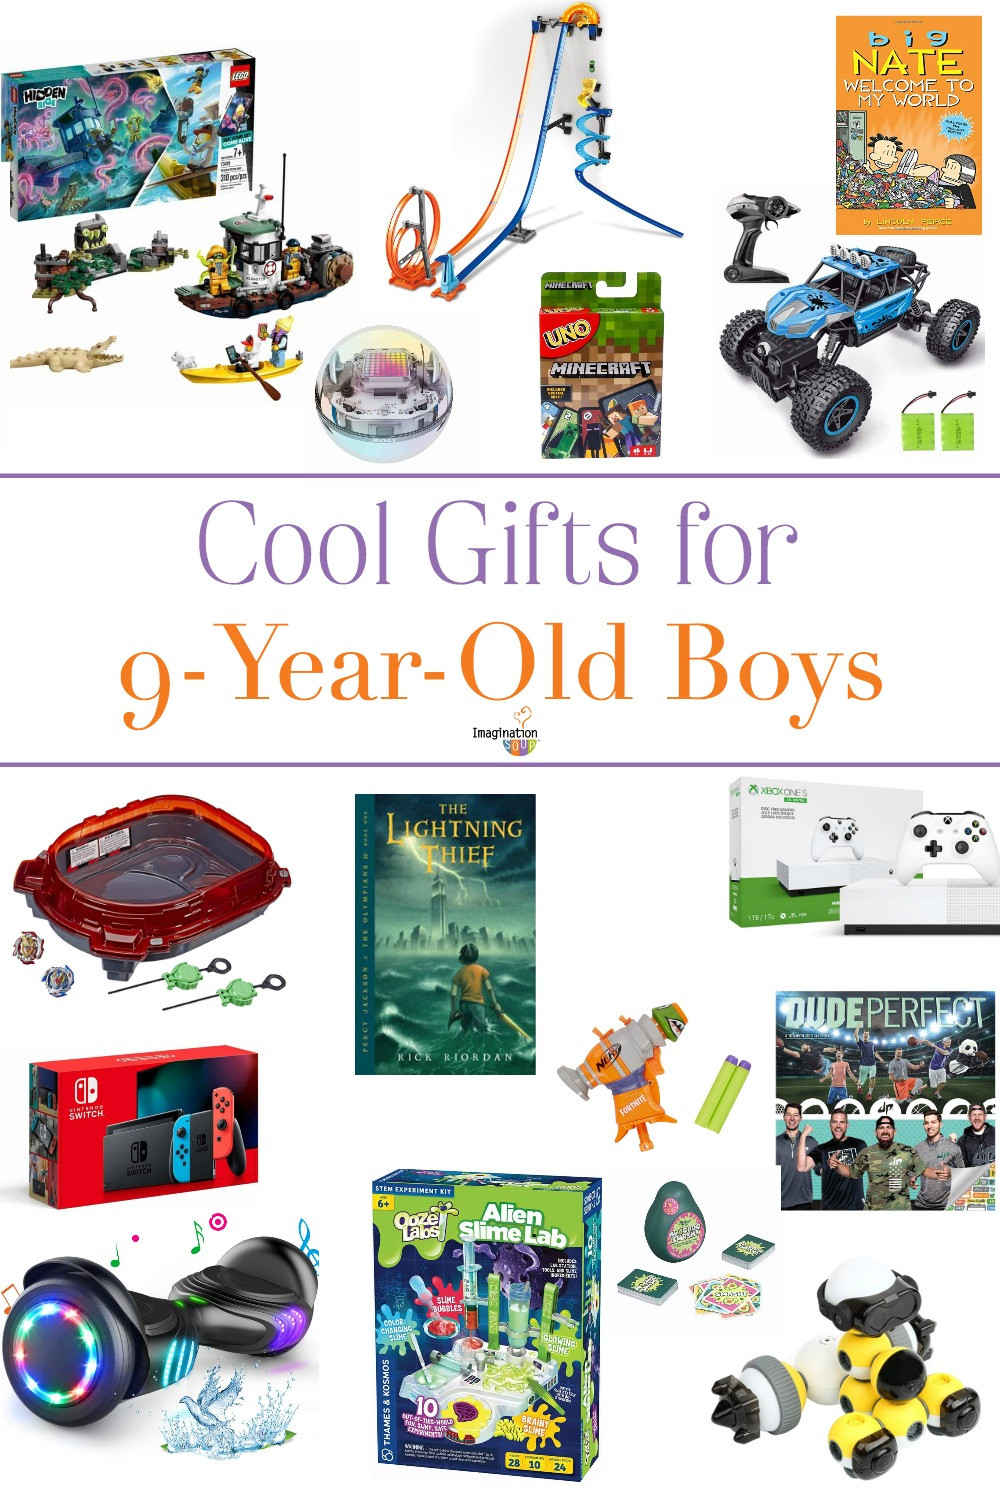 Gift Ideas For 9 Year Old Boys
 Gifts for 9 Year Old Boys